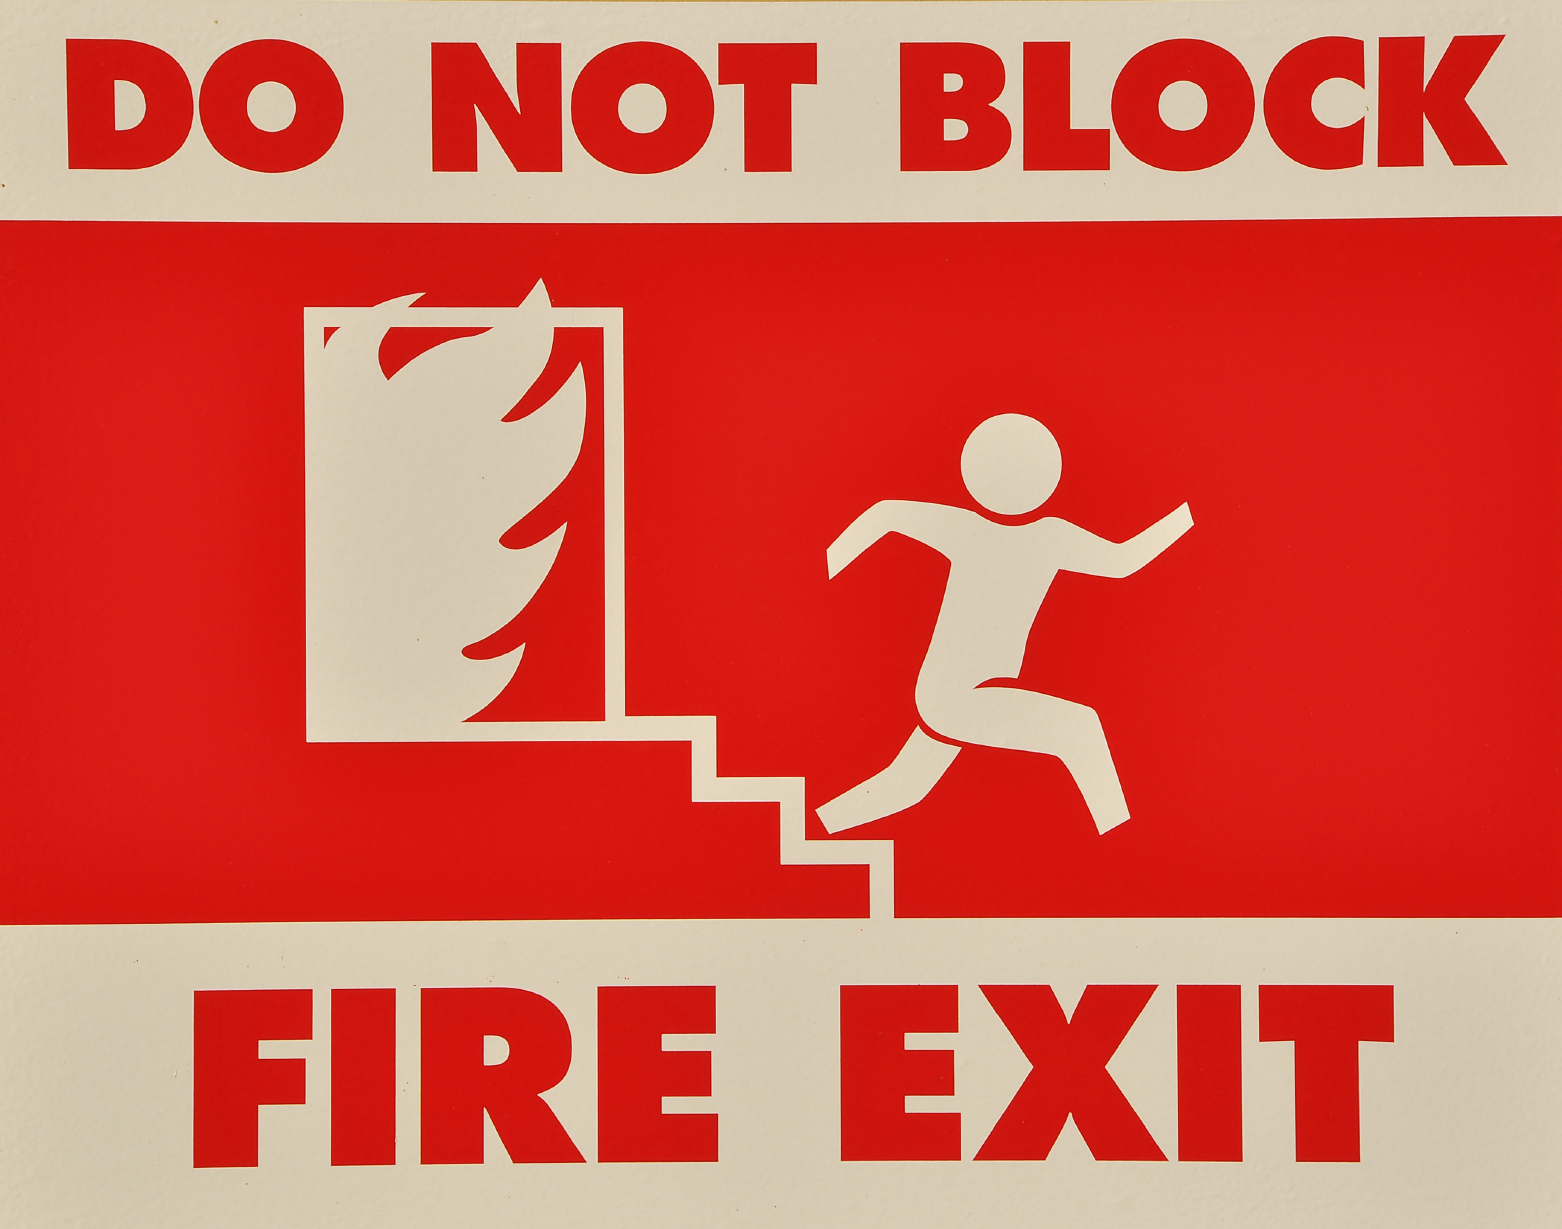 Planning an Emergency Exit | SLAC Today